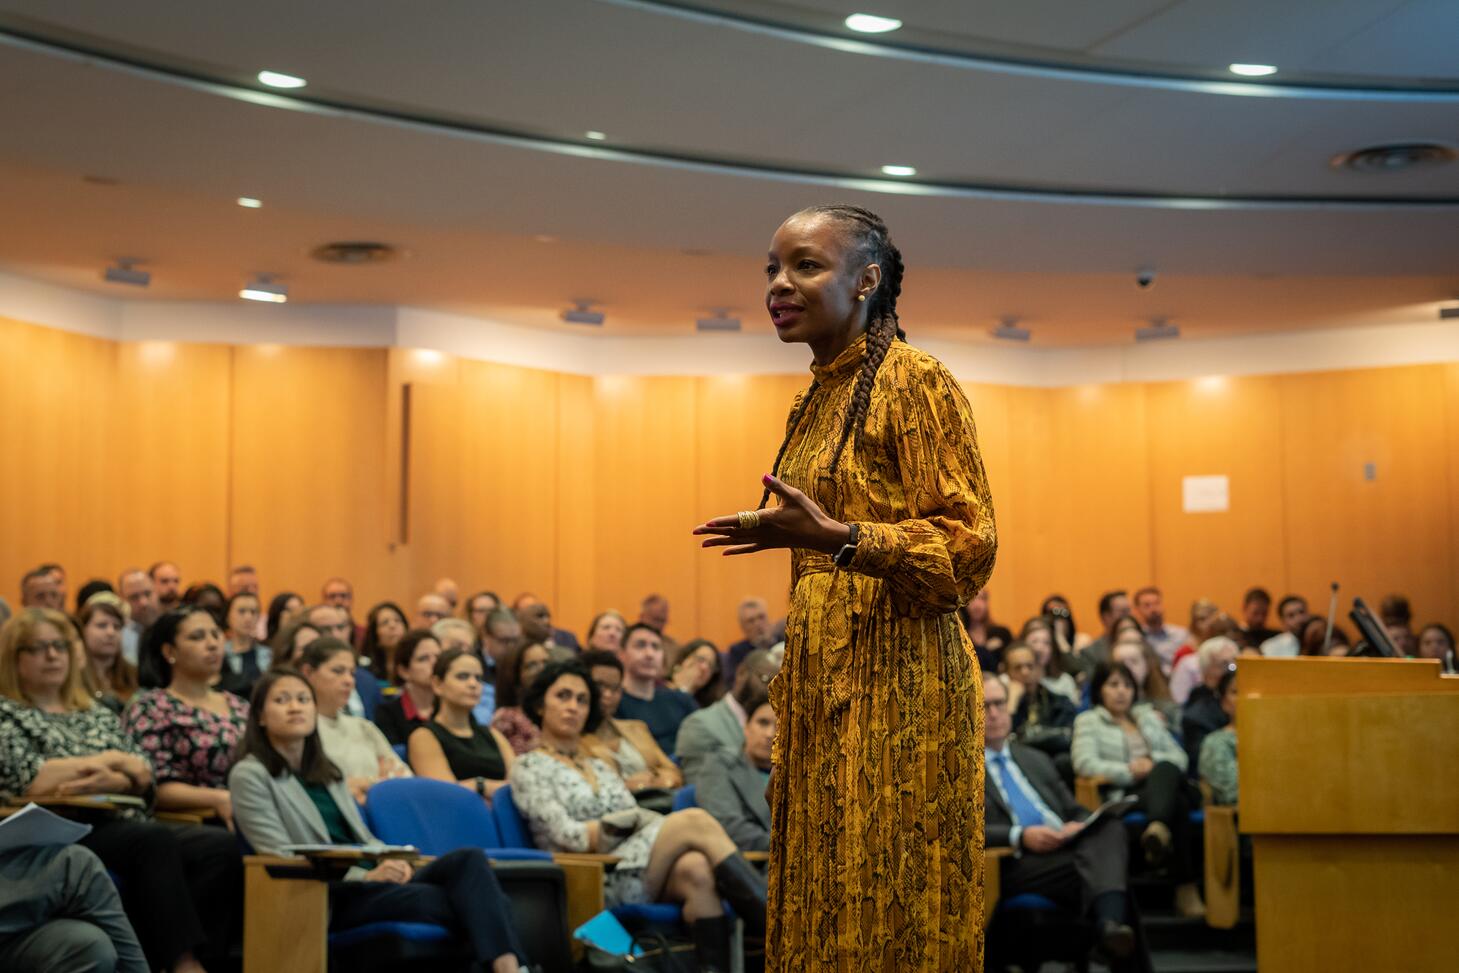 Modupe Akinola delivers a lecture to a crowded hall